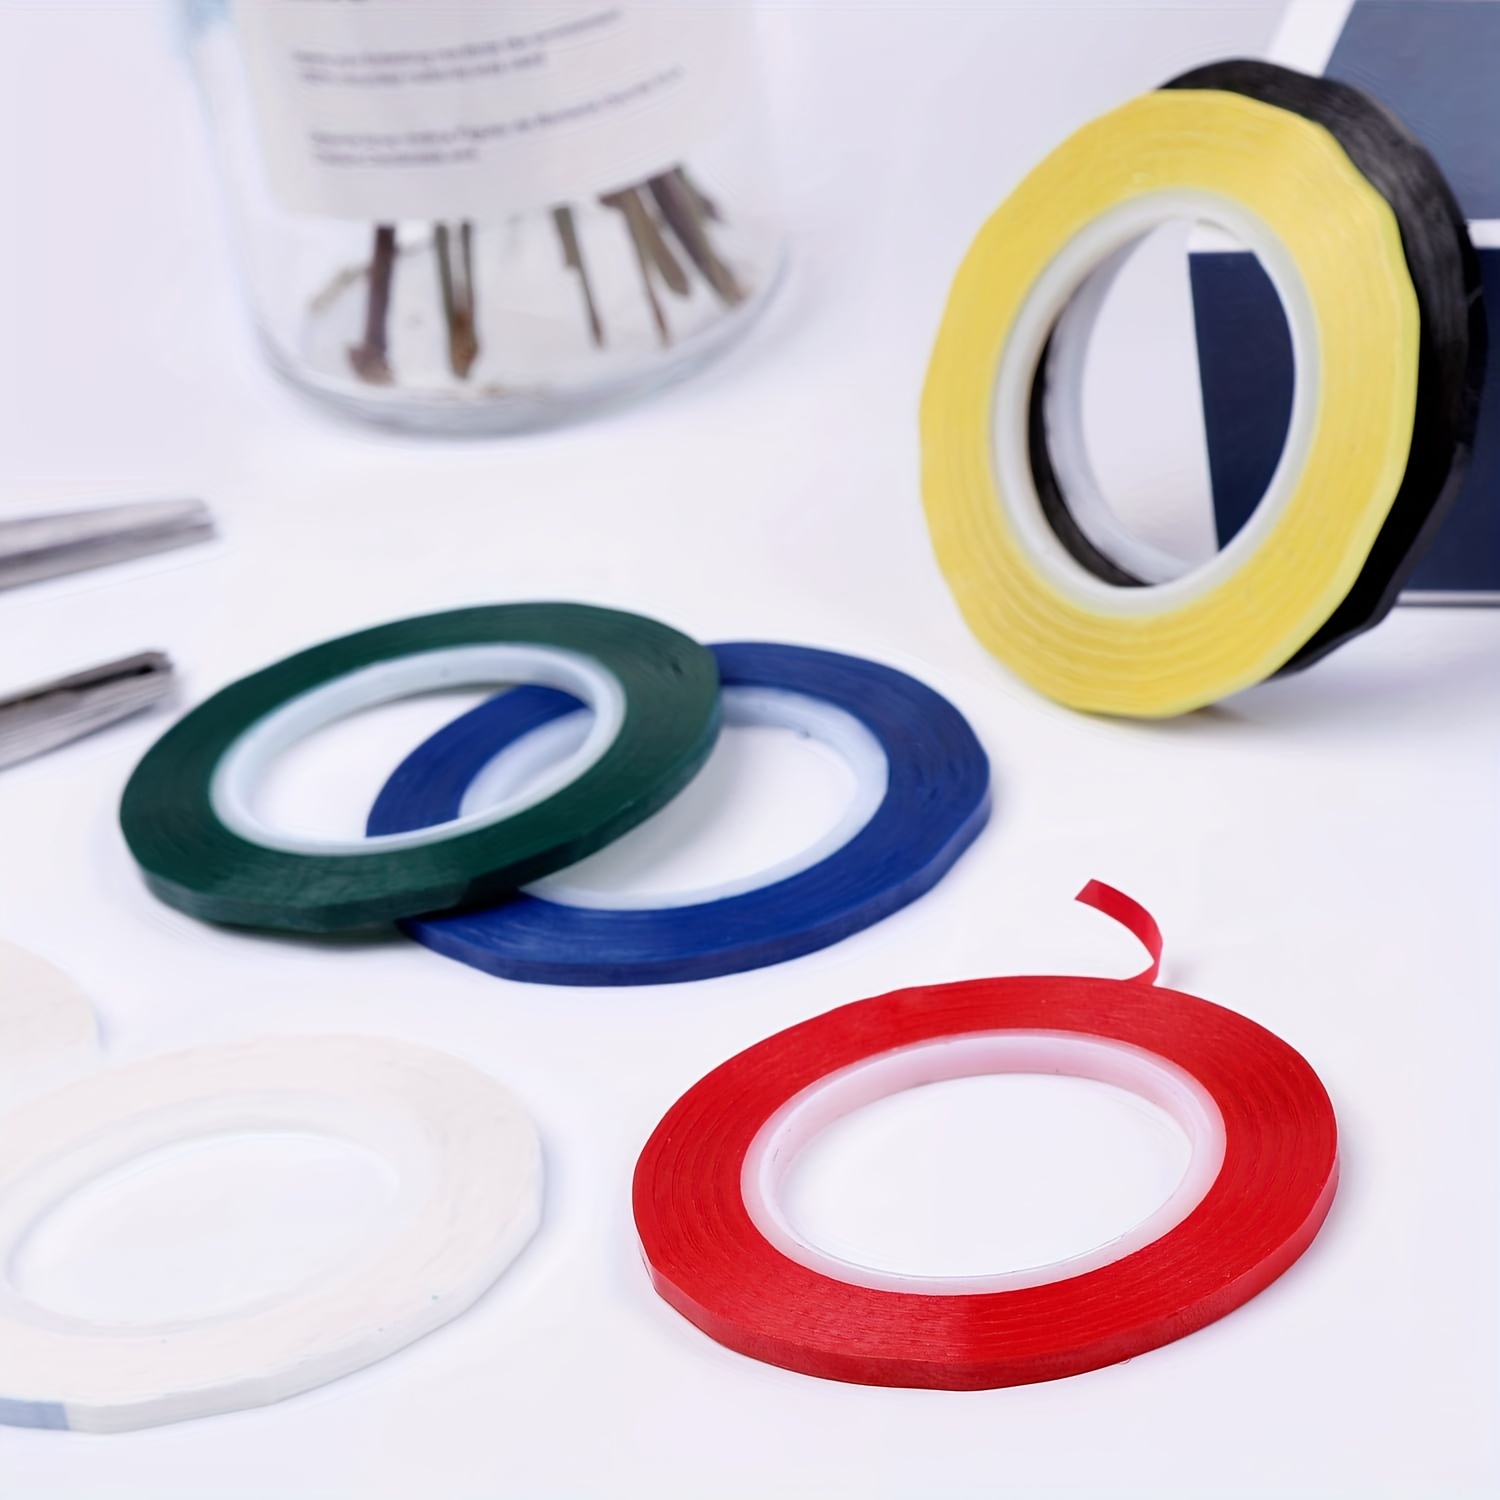 EA761LD-53｜3mm Line drawing tape for white board｜株式会社エスコ